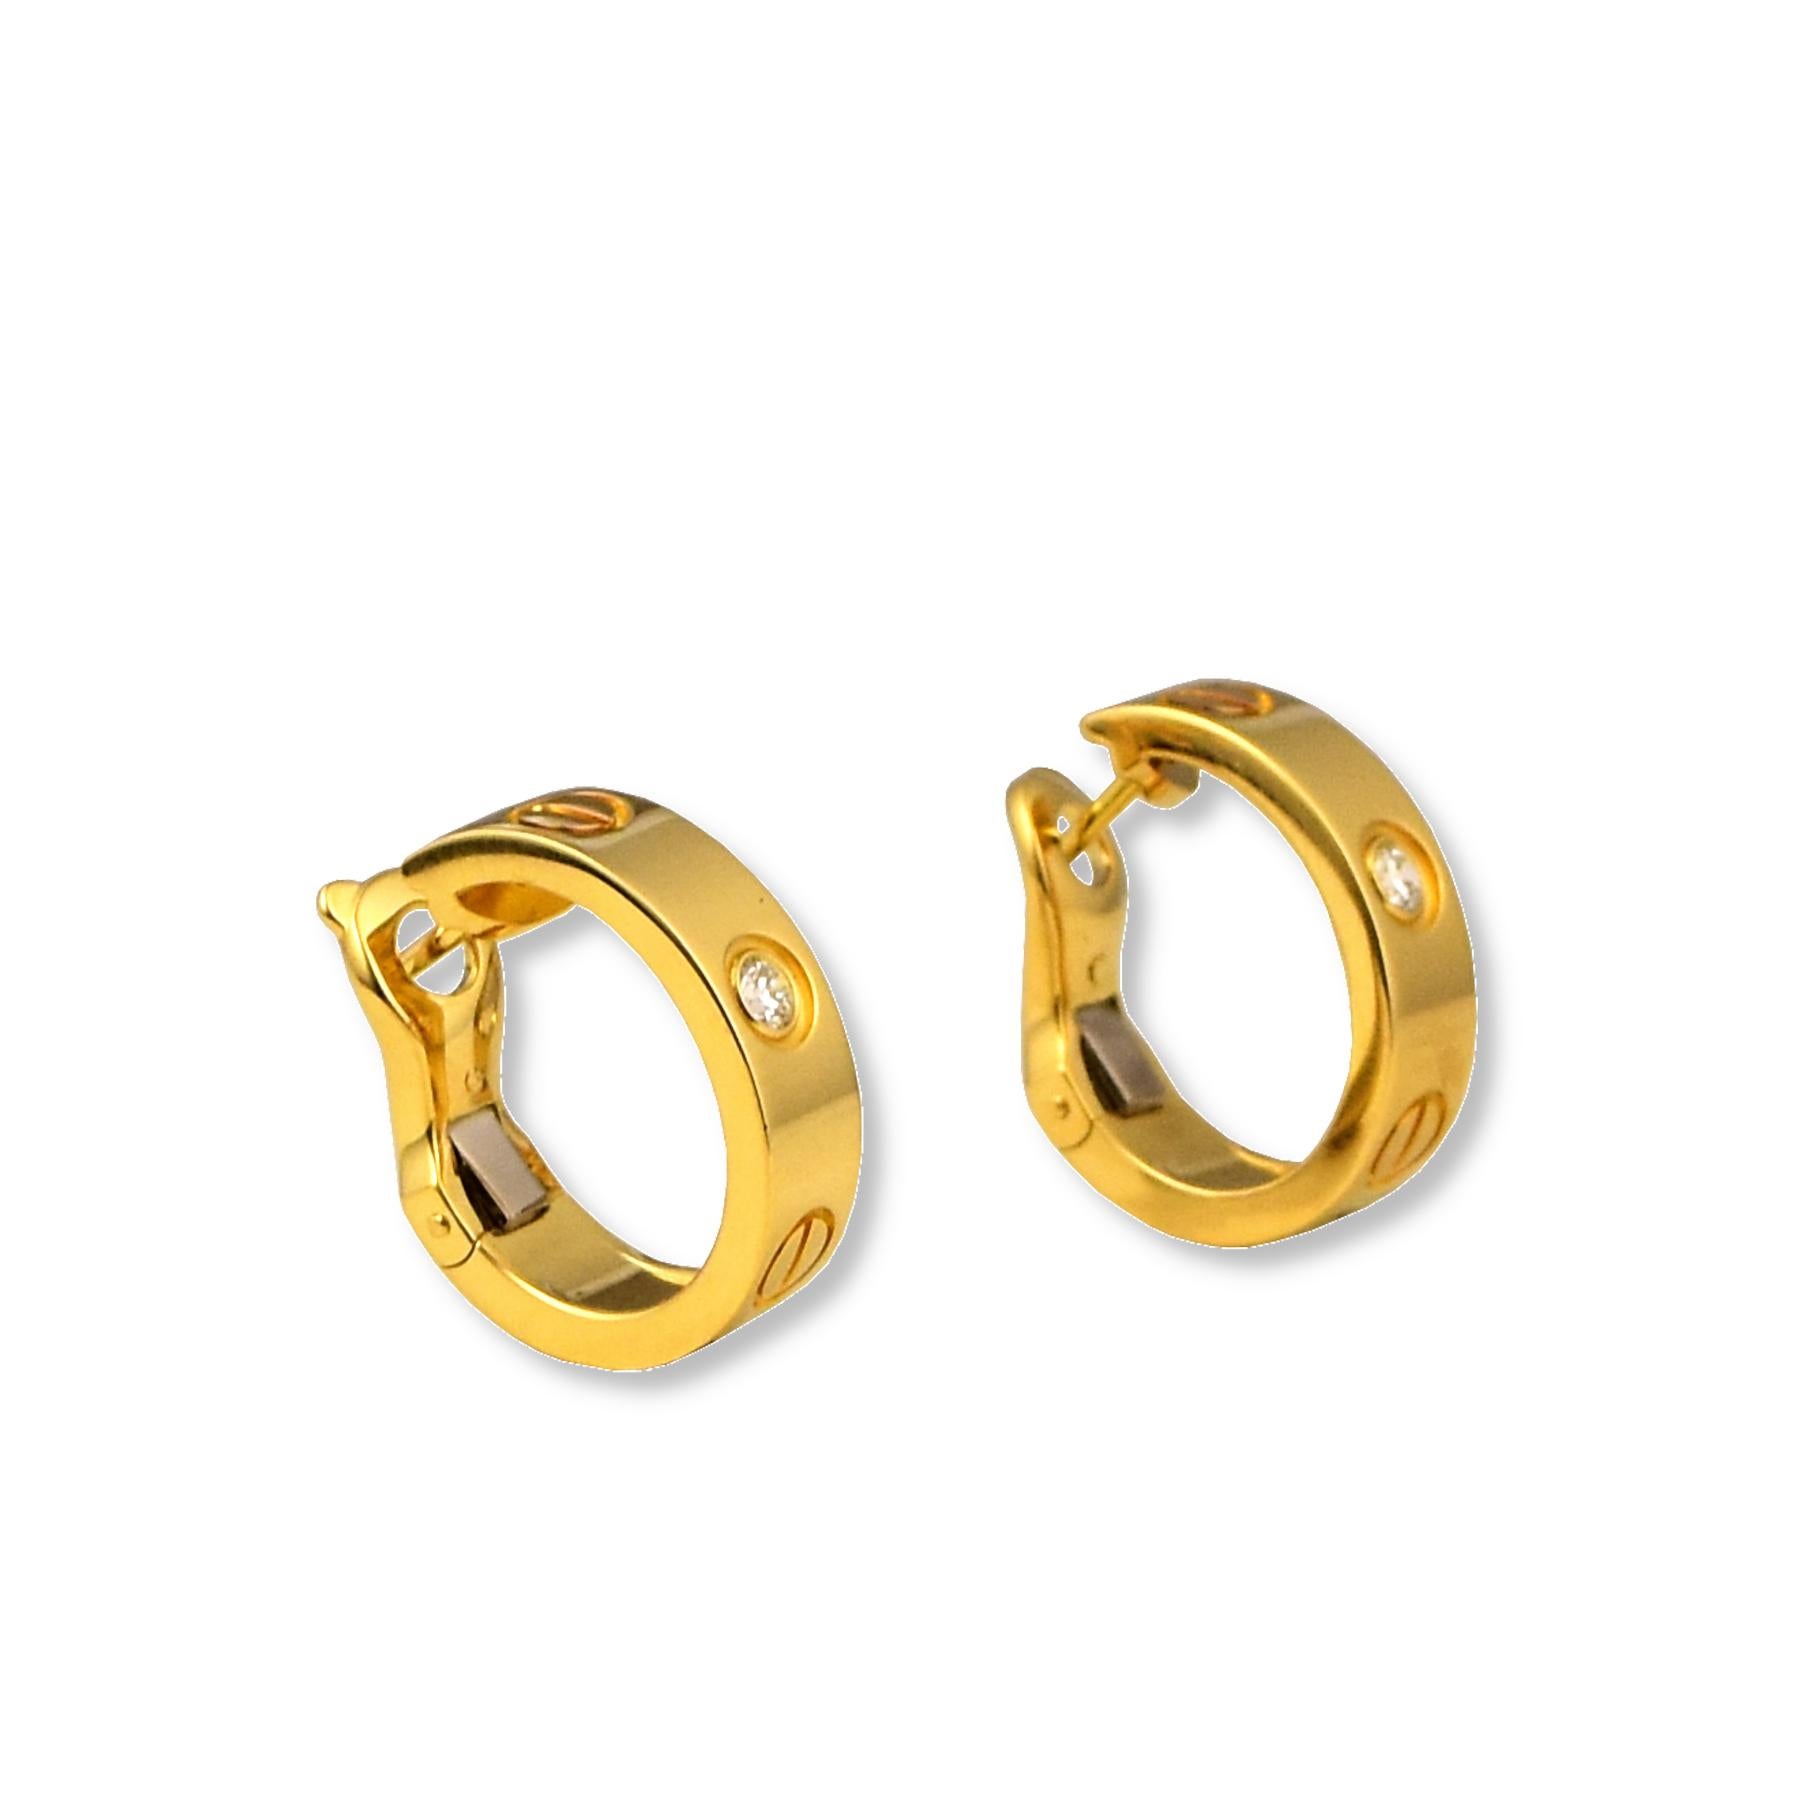 Brand: Cartier

Collection: LOVE

Style:  Earrings​​​​​​​

Metal: Yellow  Gold

Metal Purity :18K

Stones: Round Brilliant Cut

Size:  5.7 mm

Total Item Weight(Grams): XX

Hallmark: Cartier; 18k; Serial #

Includes: 24 Month Brilliance Jewels